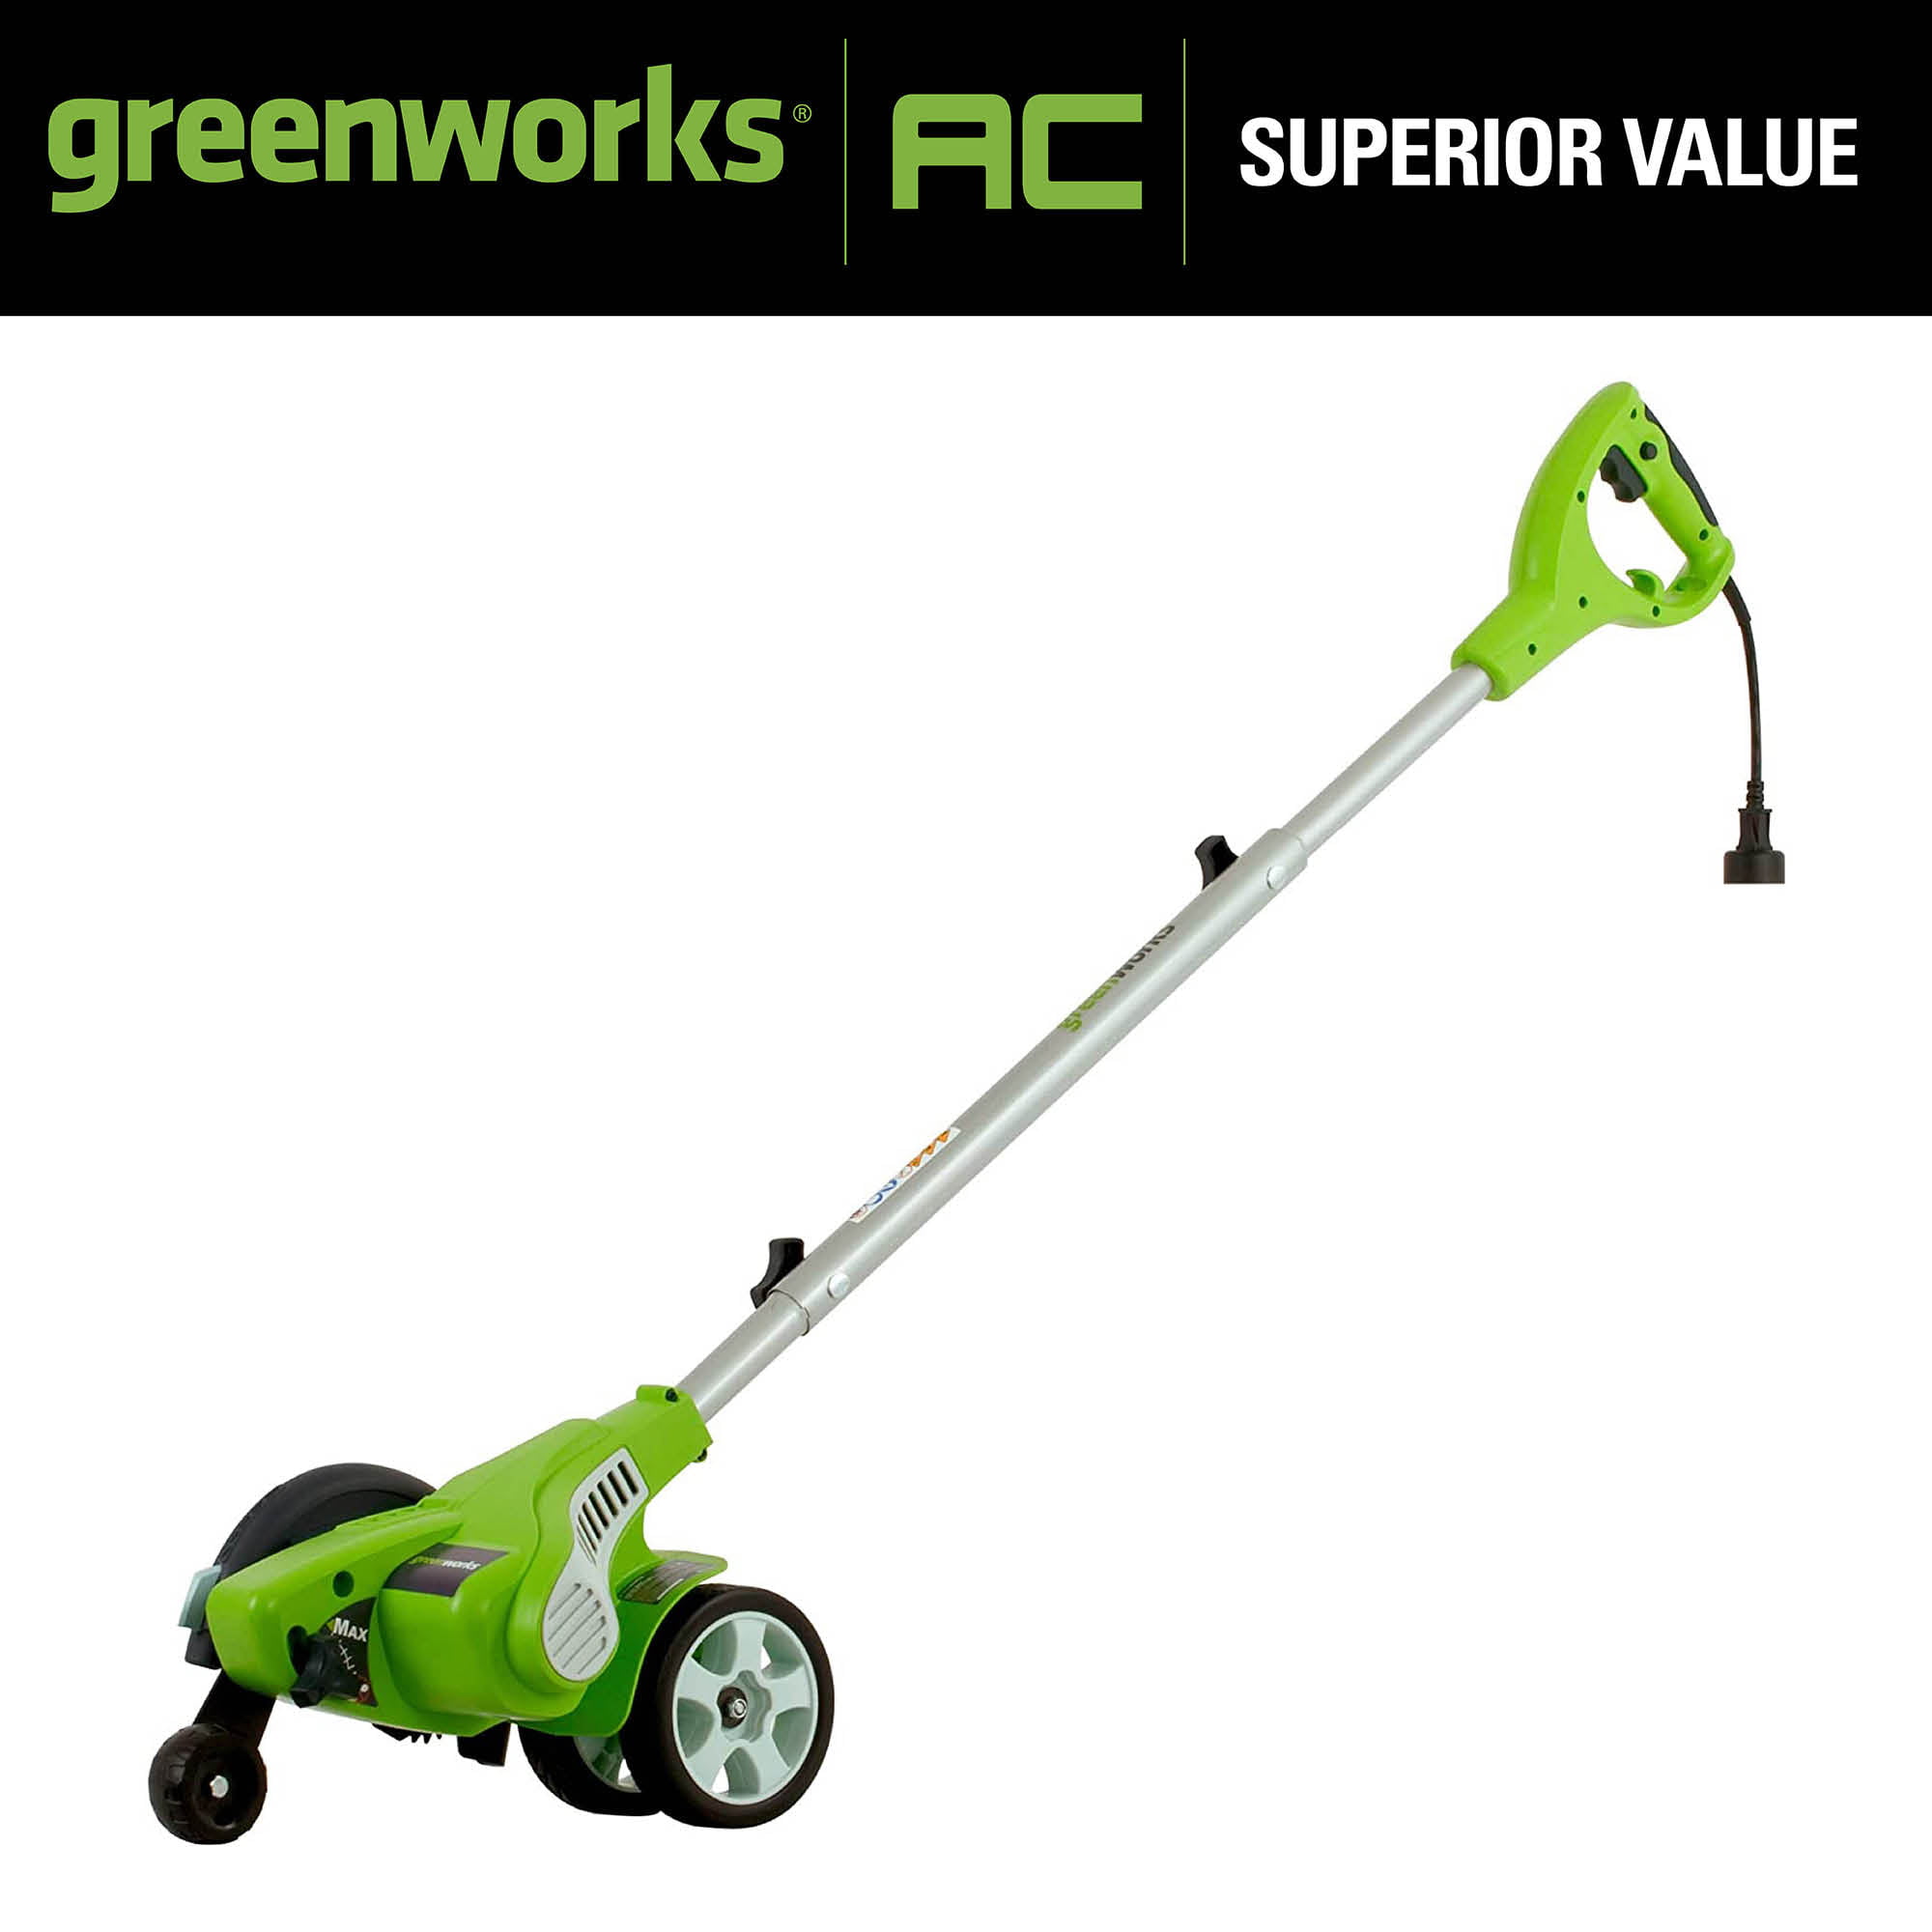 Greenworks 12 Amp 7.5-inch Corded Electric Edger， 27032